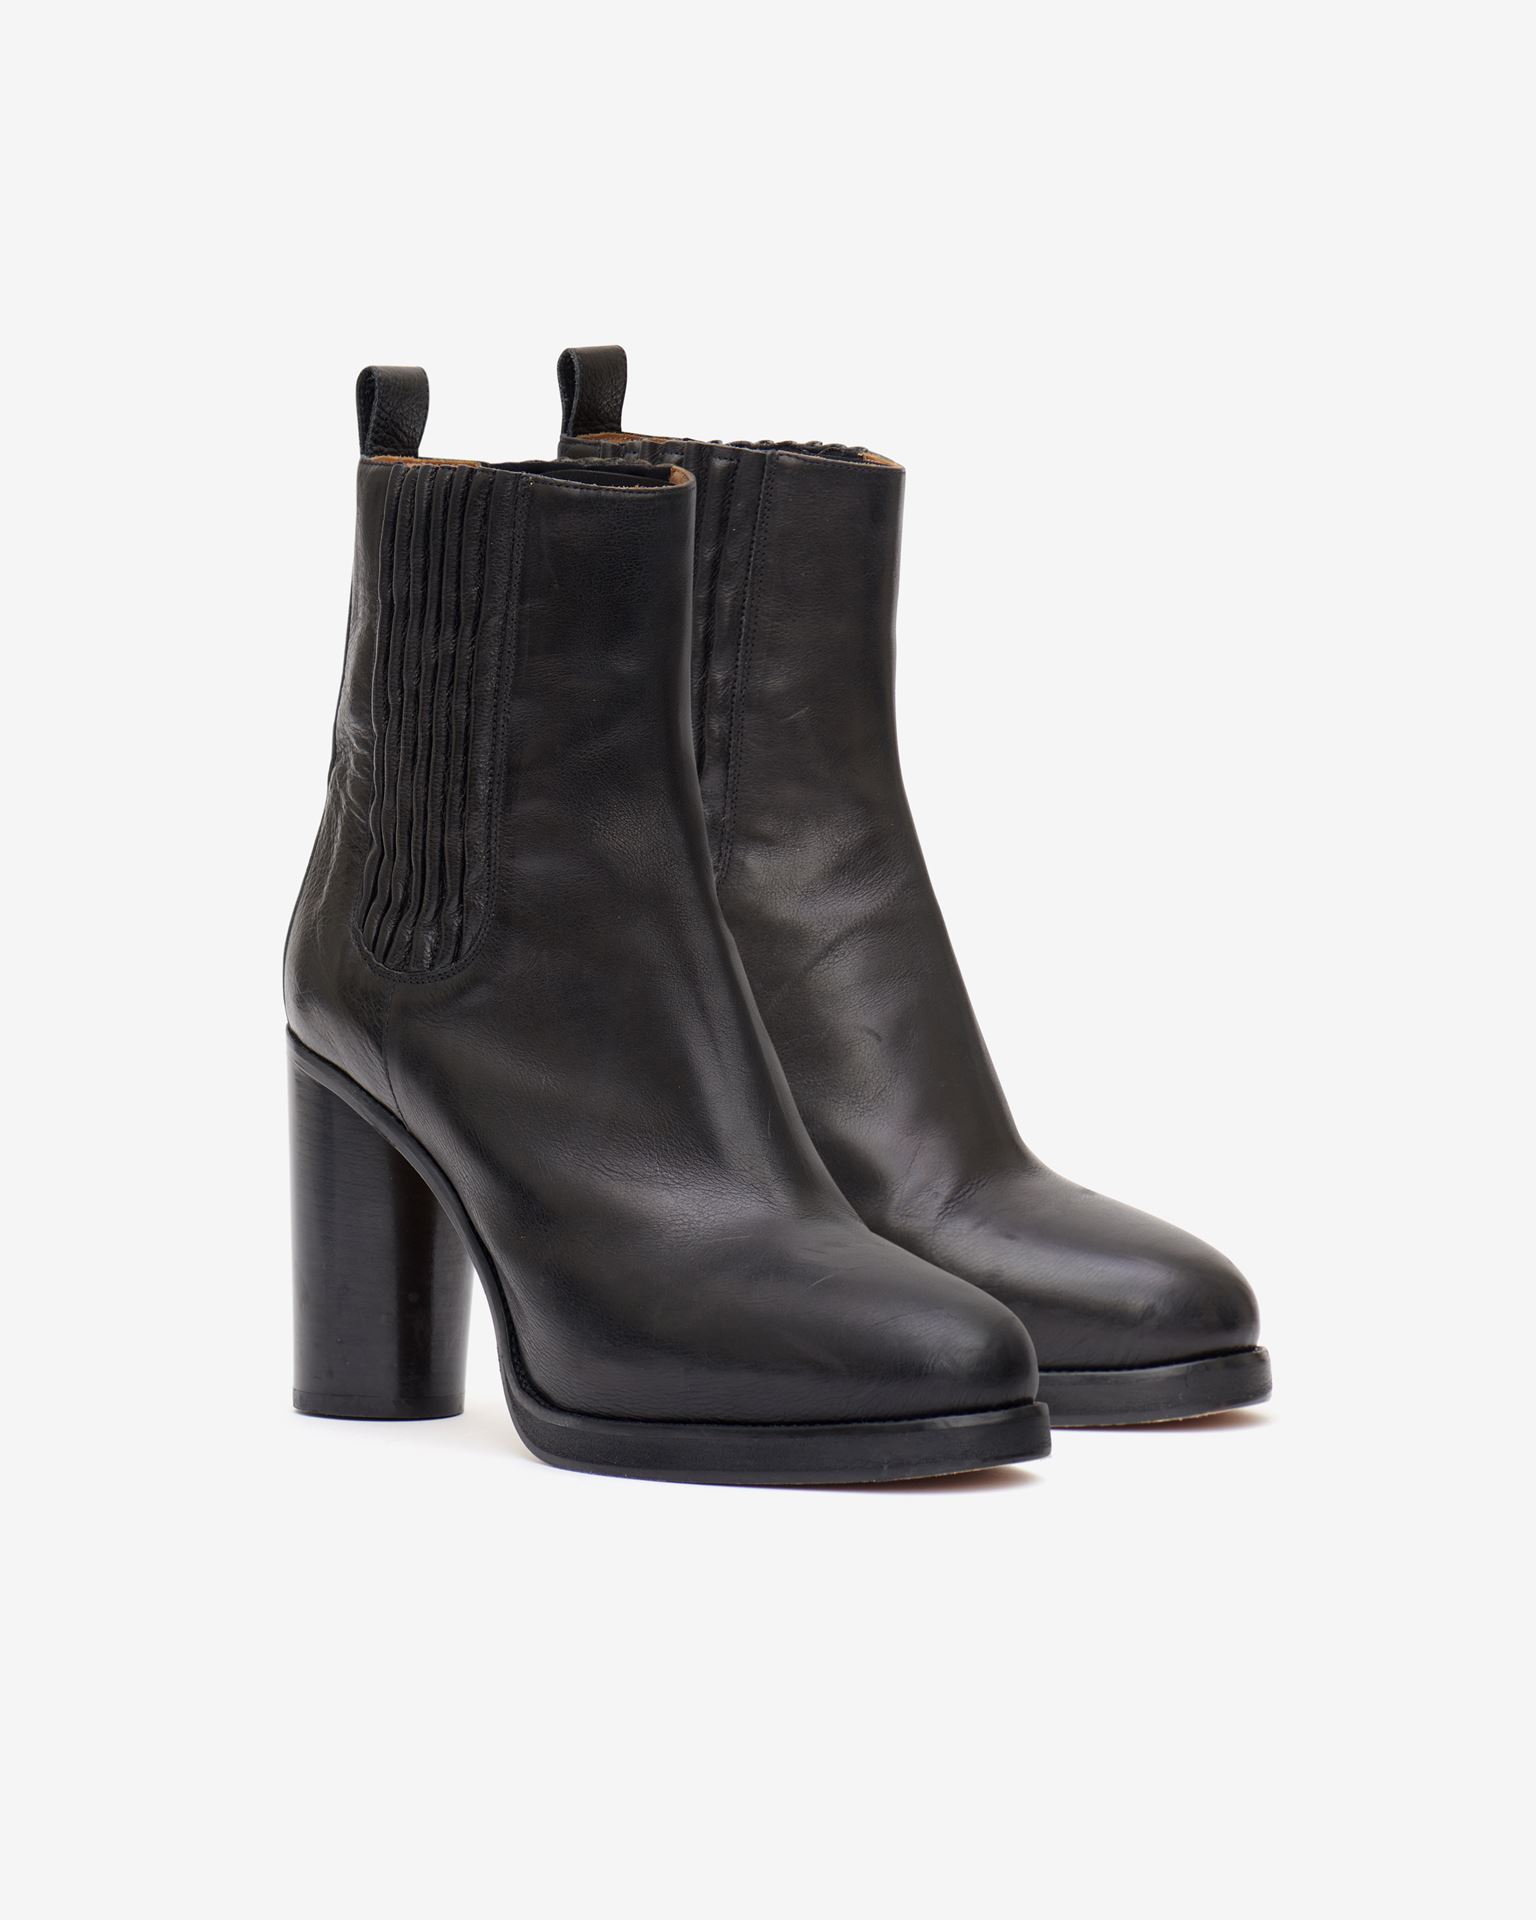 Isabel Marant, Lilde Leather Ankle Boots - Women - Black